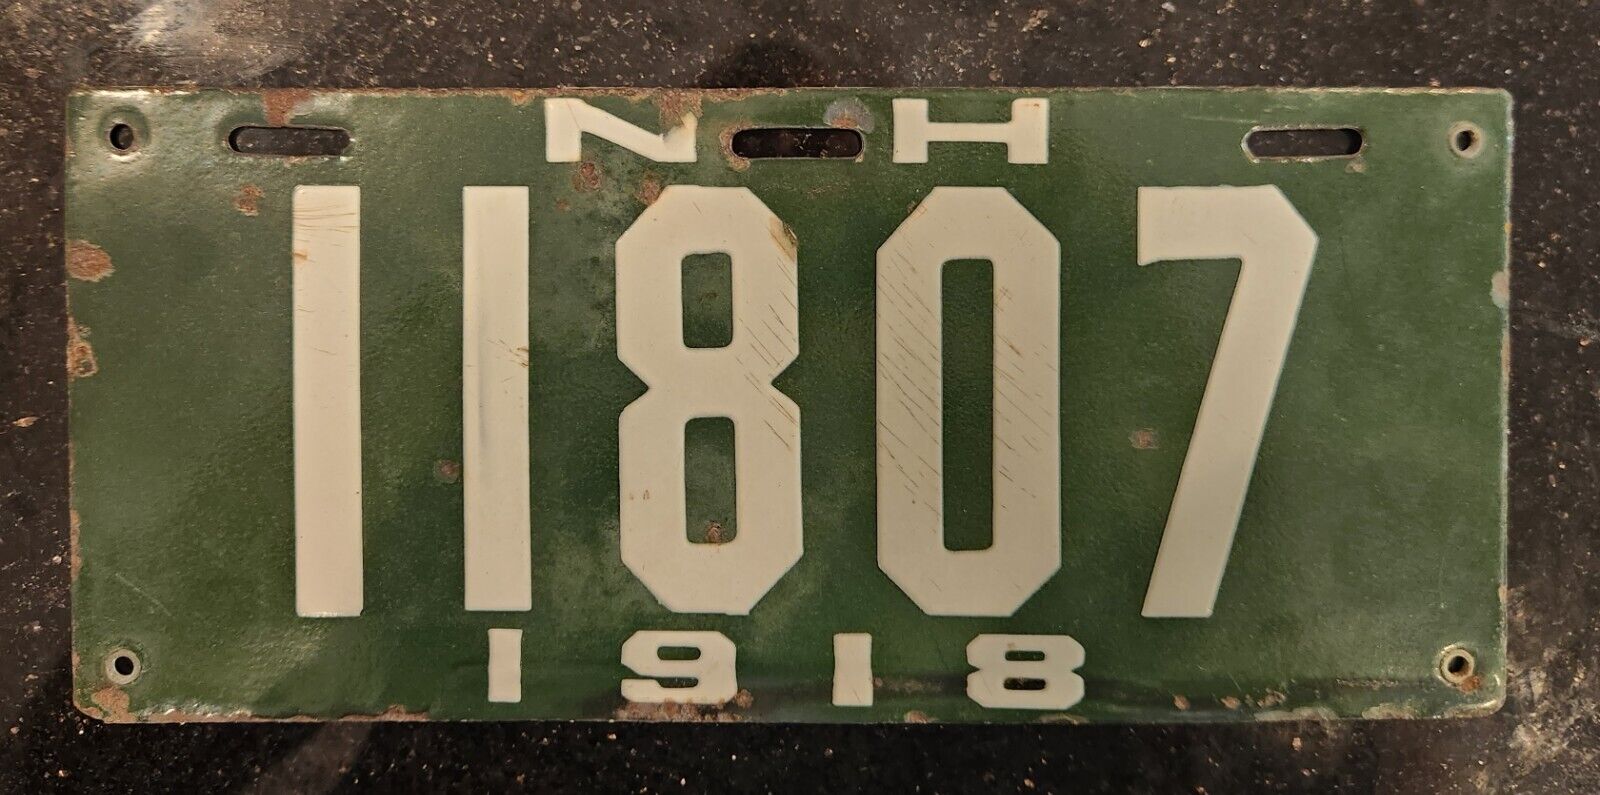 1918 New Hampshire NH Porcelain License Plate Car Tag Auto Vehicle Registration